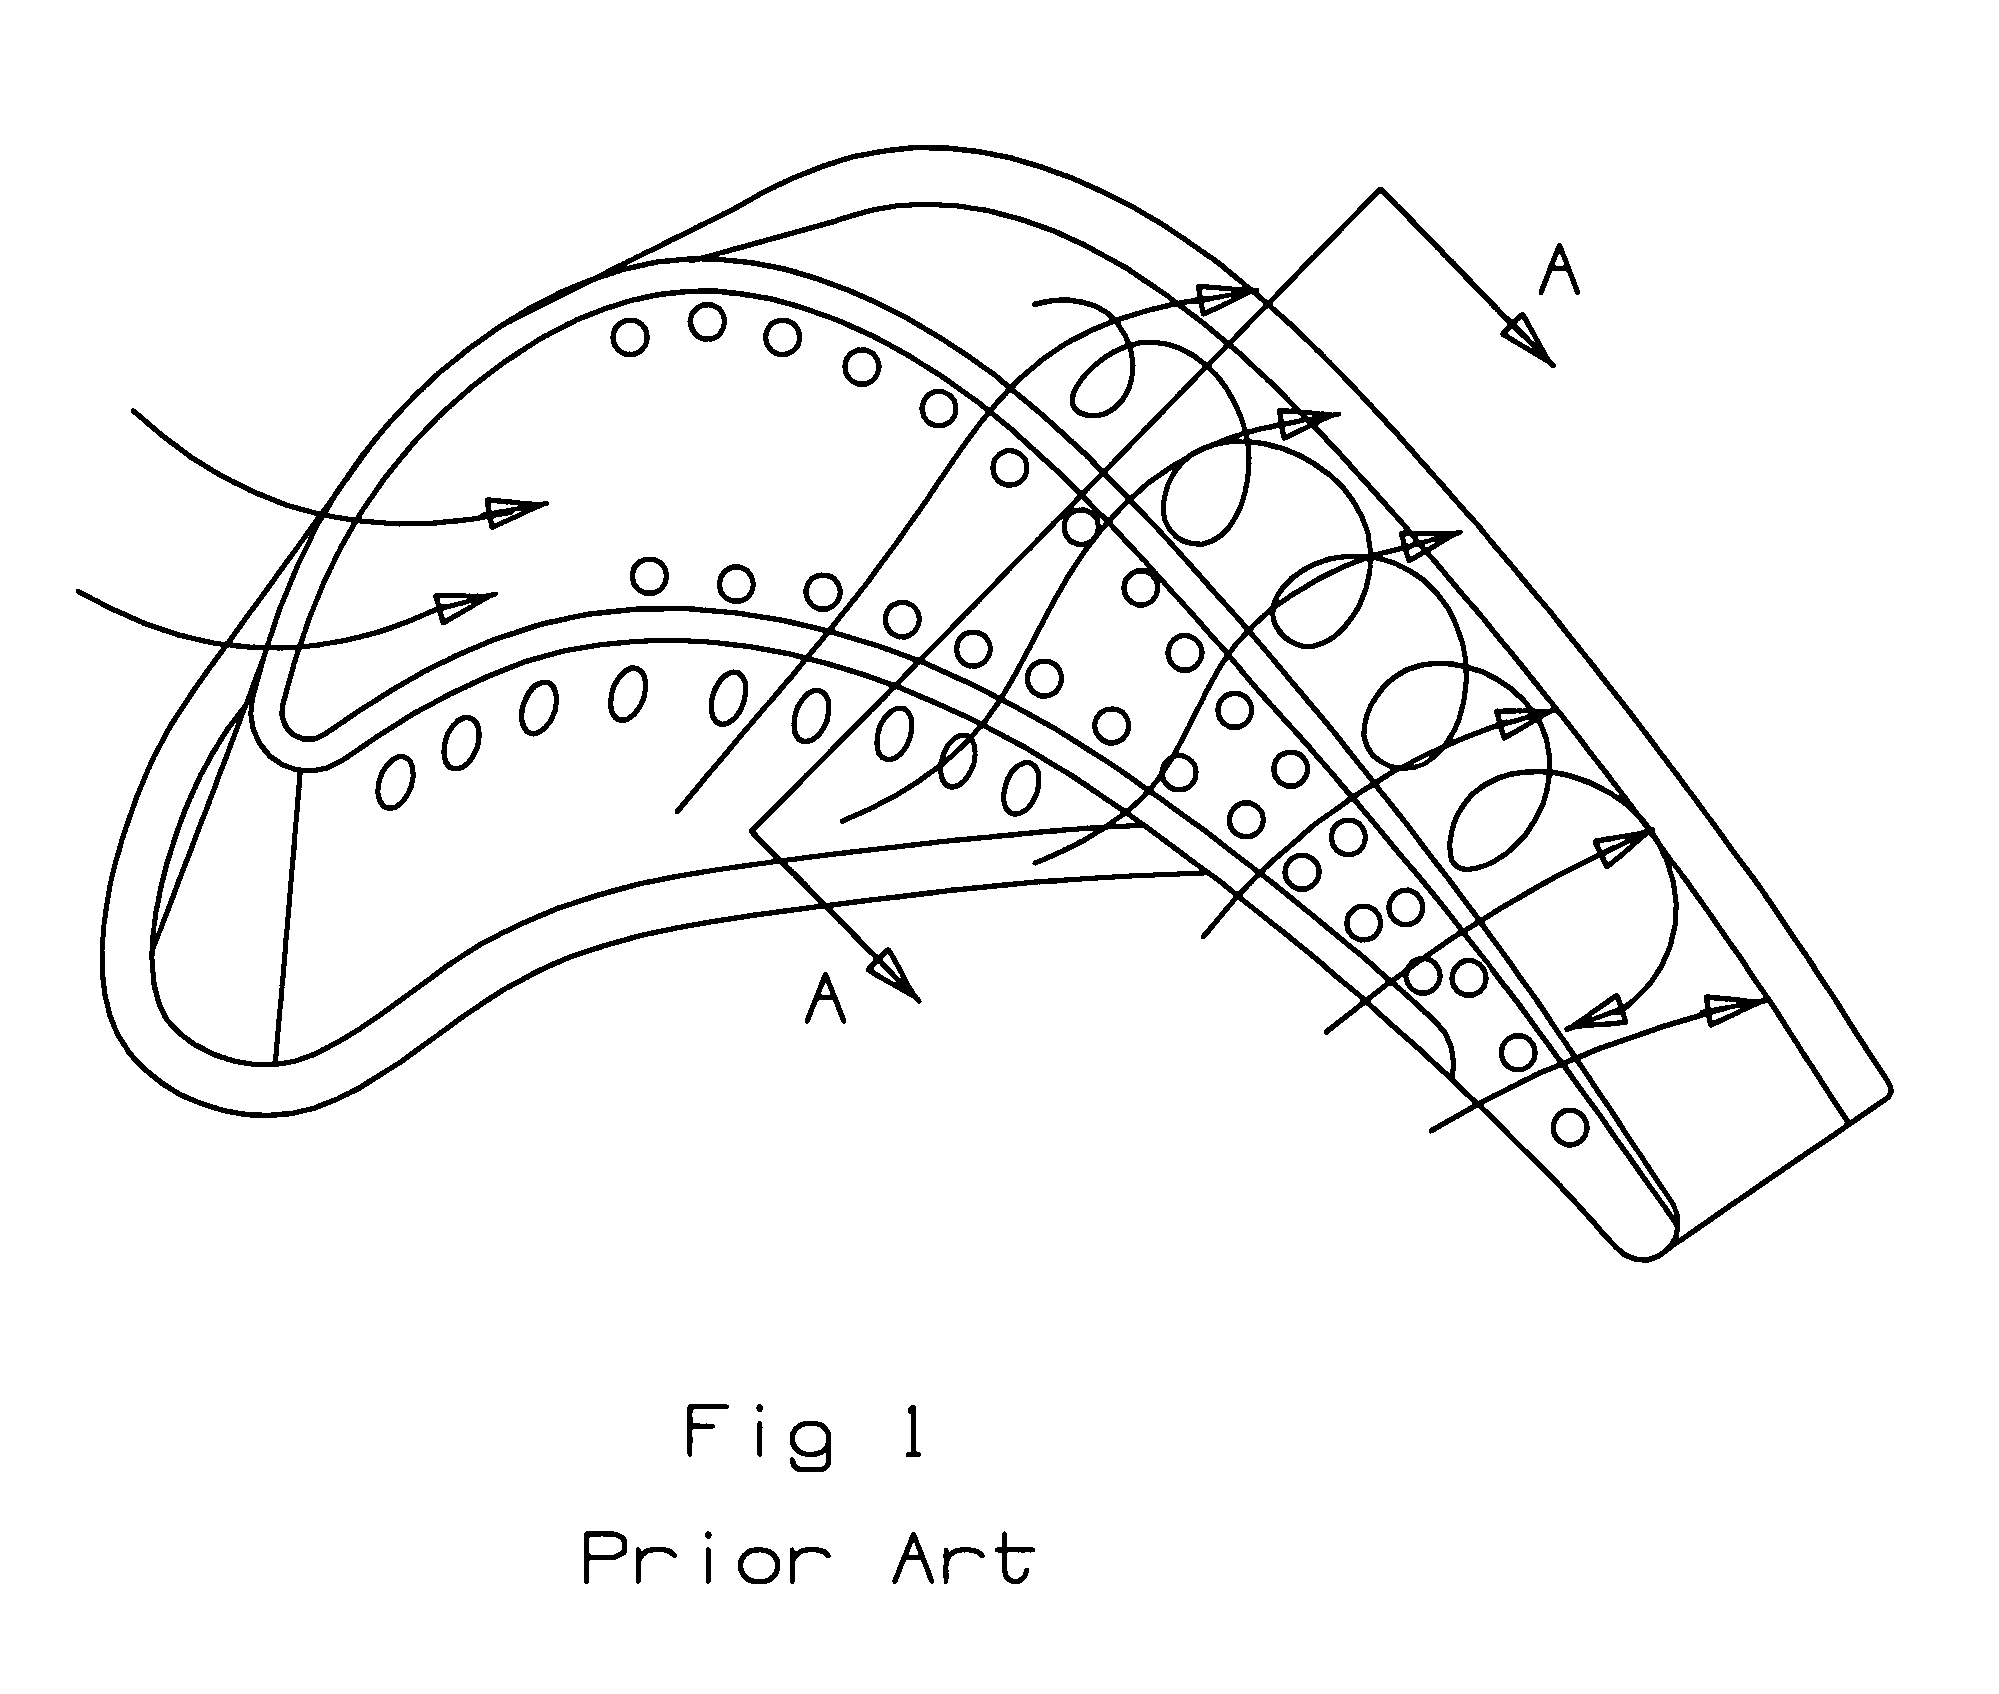 Turbine blade with blade tip cooling passages